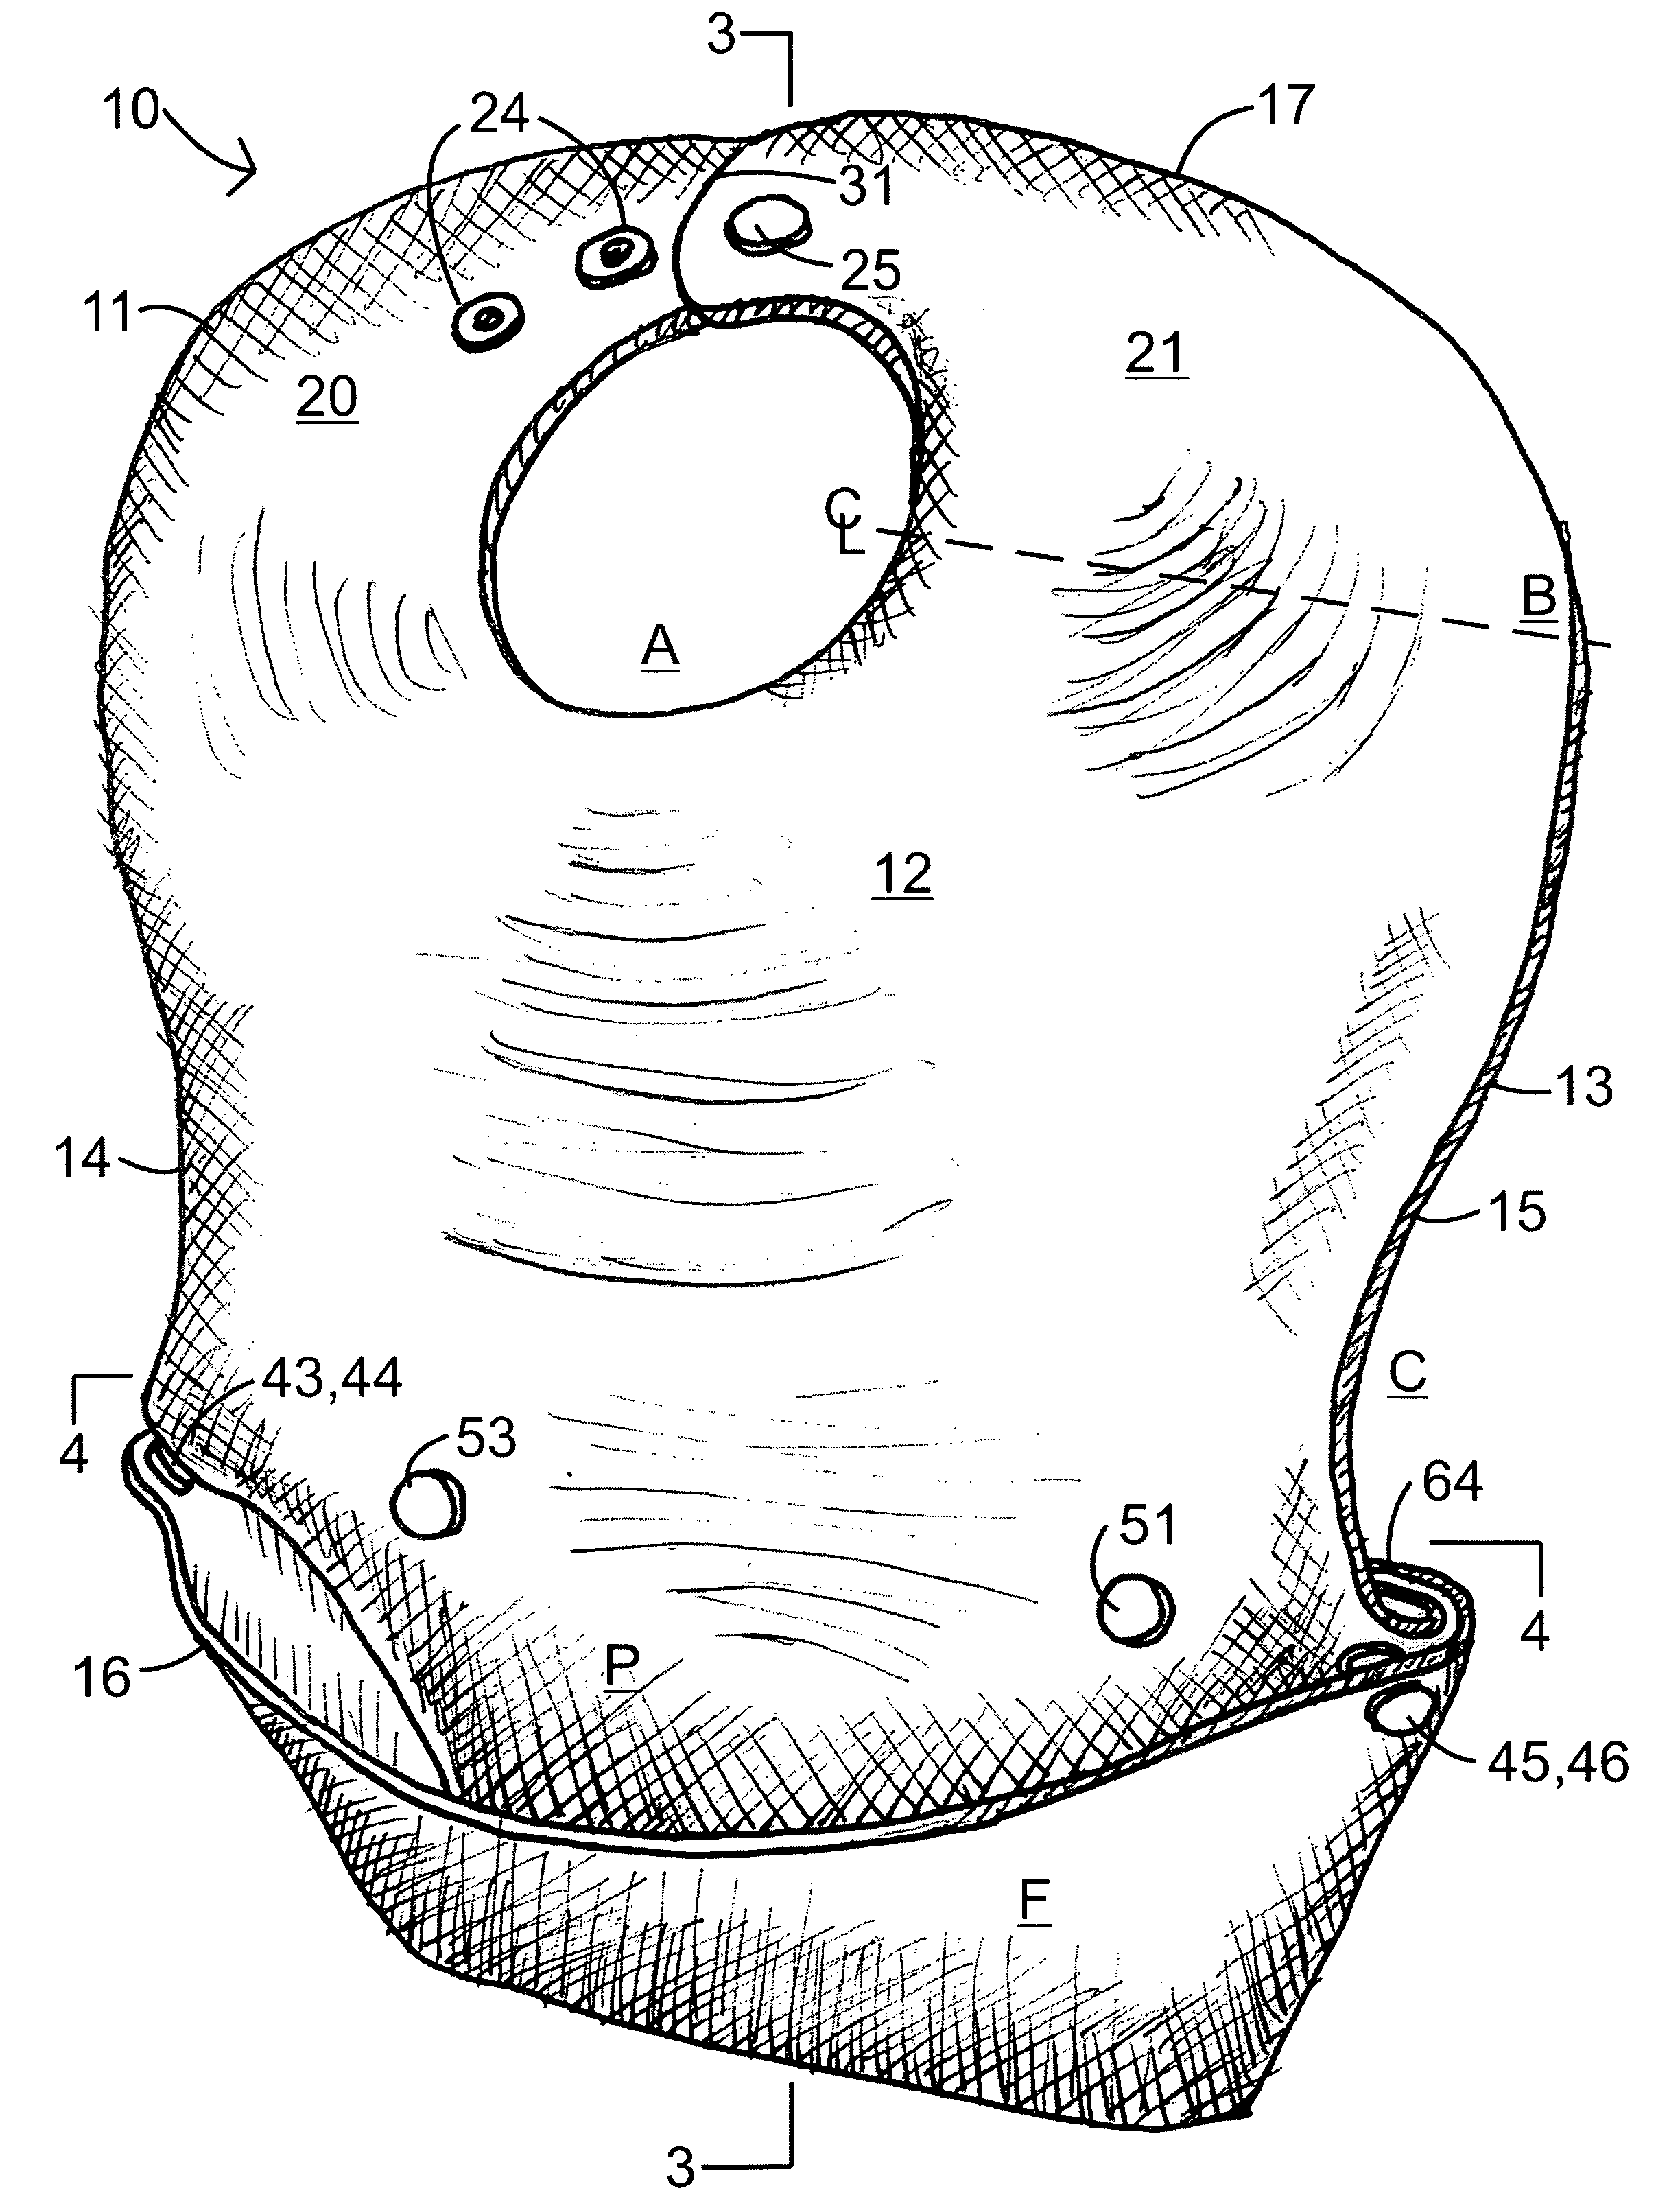 Bib with an improved pocket